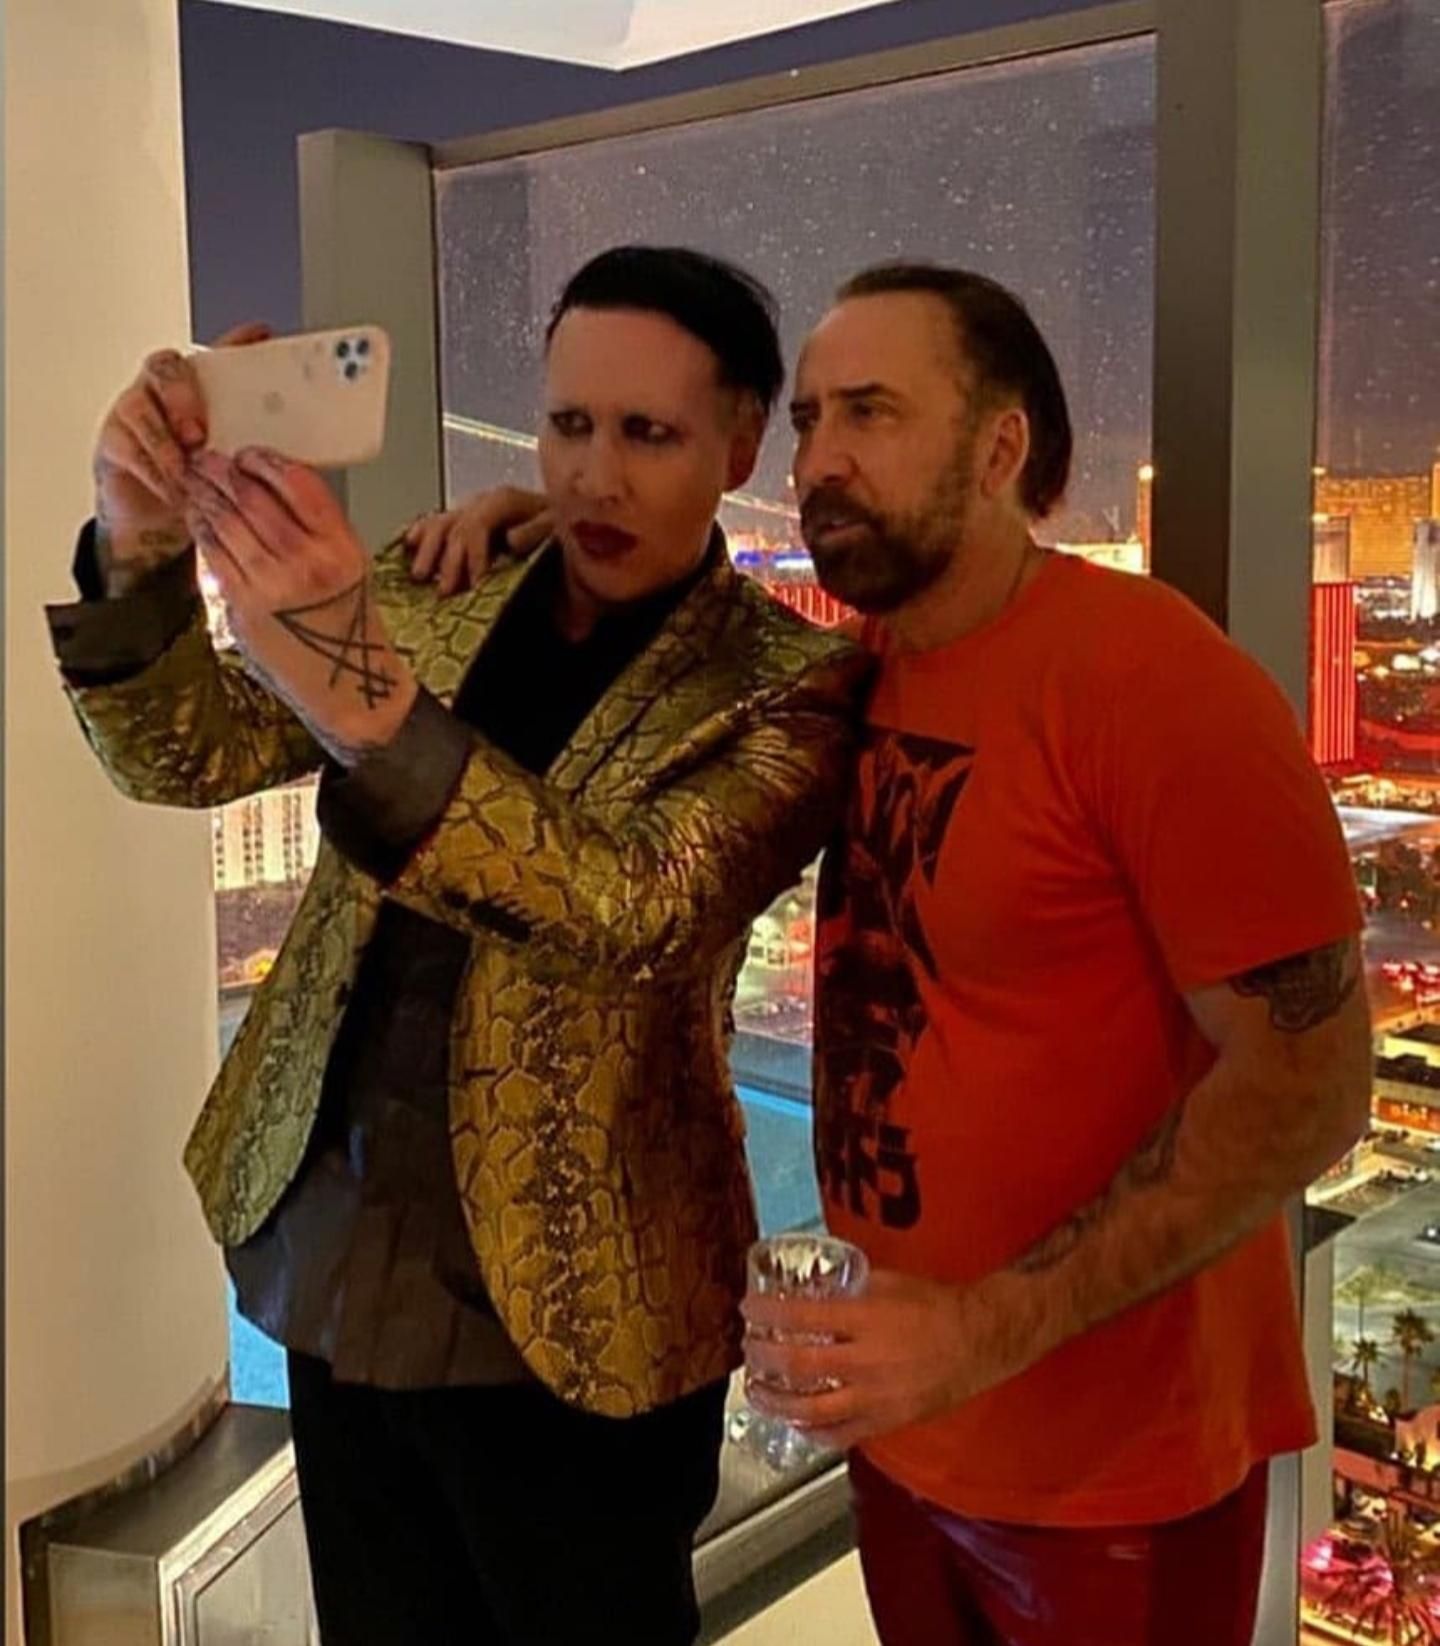 The crossover we've all been waiting for. Proof that Marilyn Manson and Nicholas Cage are Not the same person